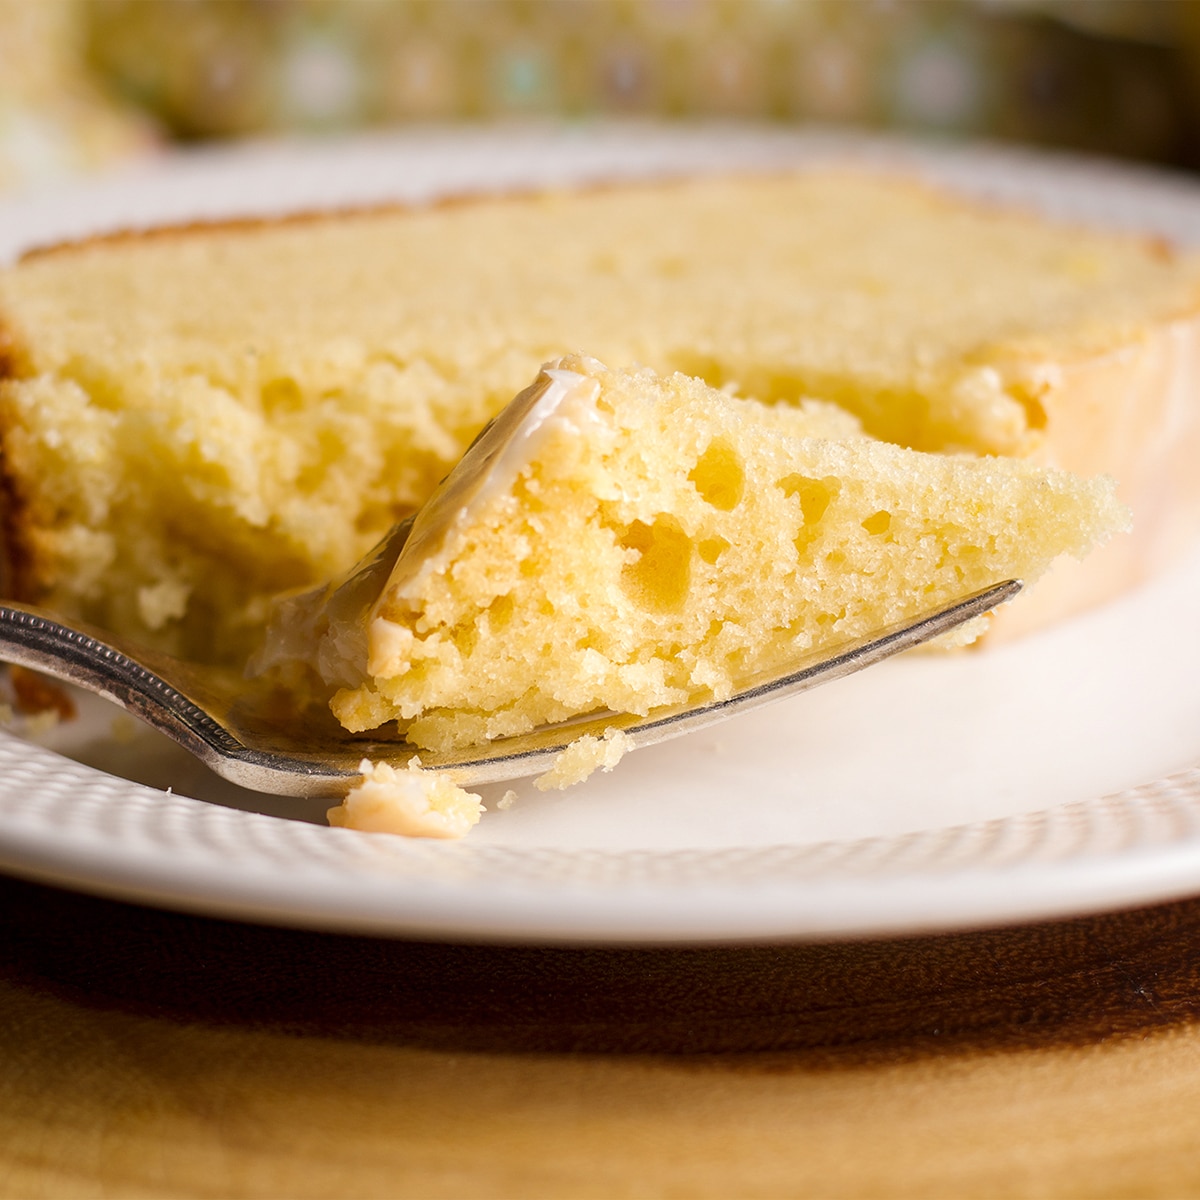 Using a fork to cut a bite from a slice of lemon loaf cake.